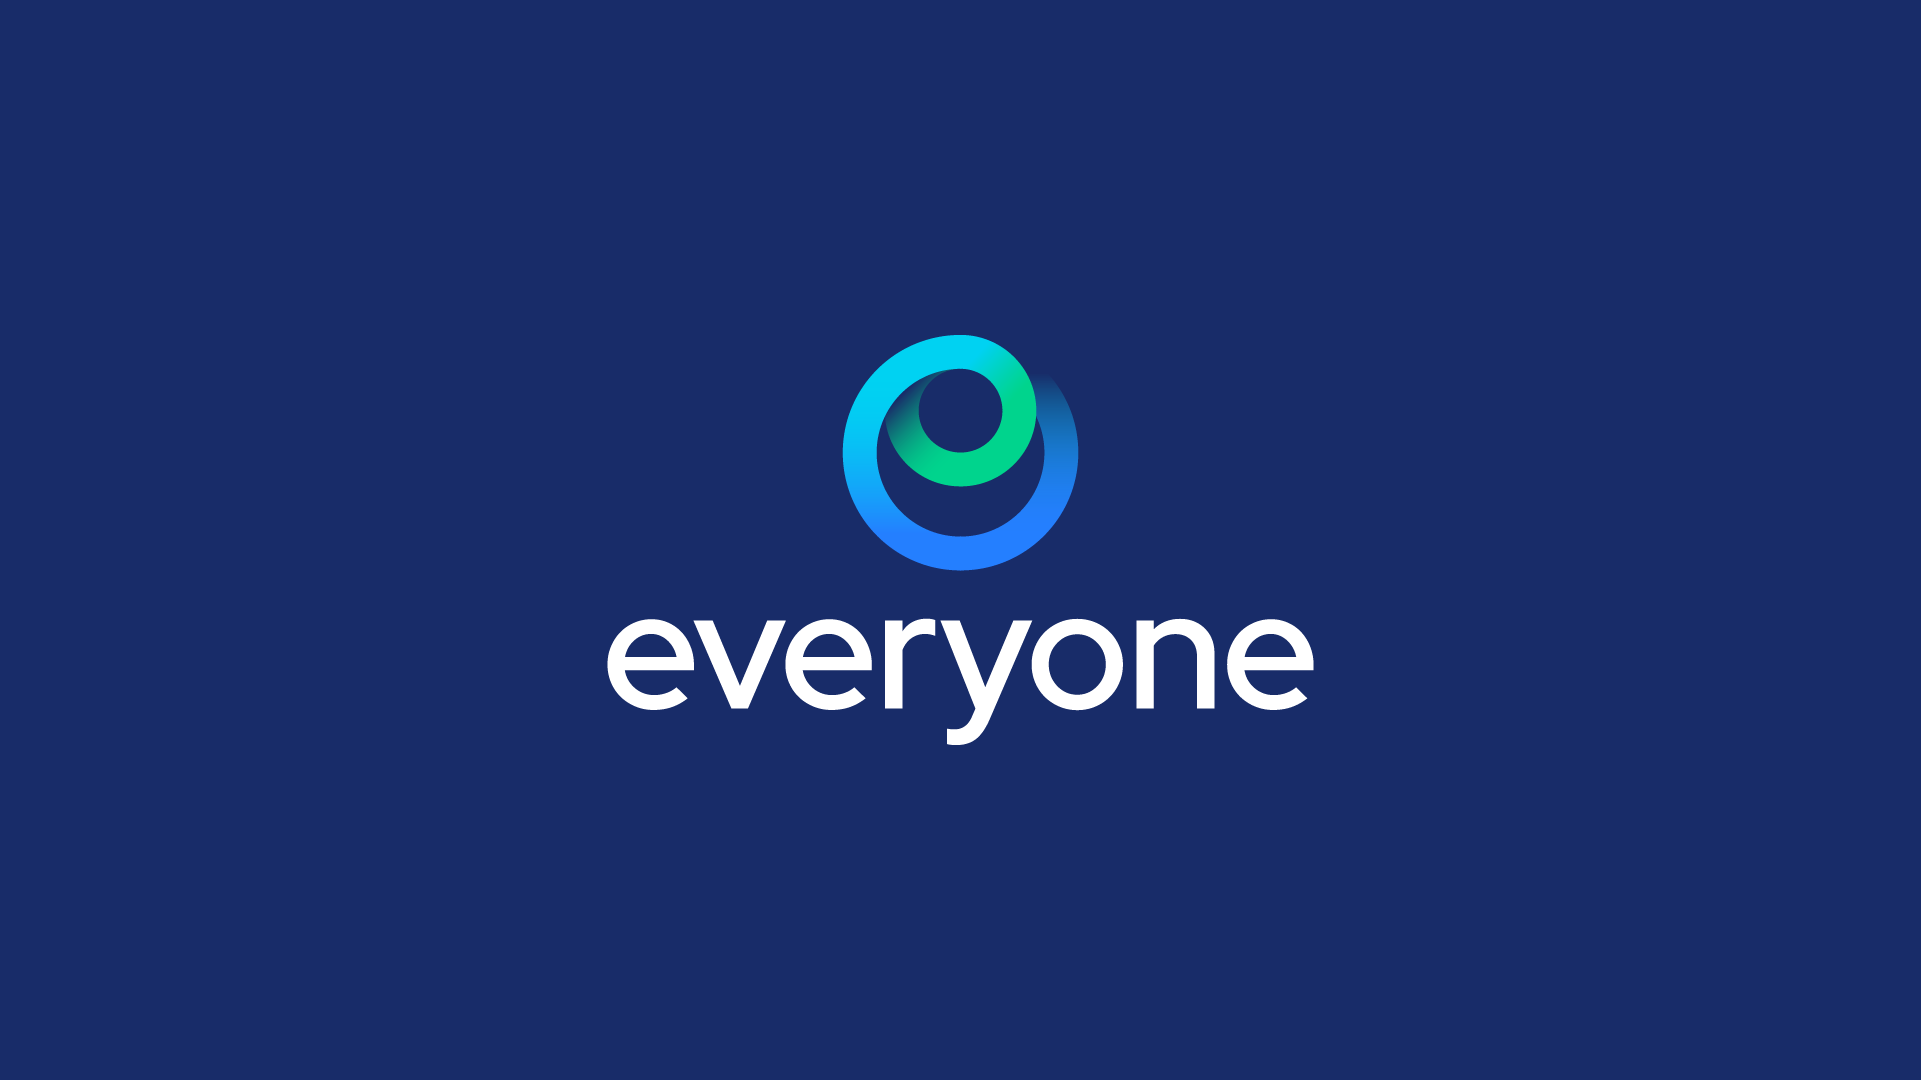 Everyone - Nonprofit Communication Platform logo, features abstract letter 'E' in a circular form, symbolizing unity and inclusivity